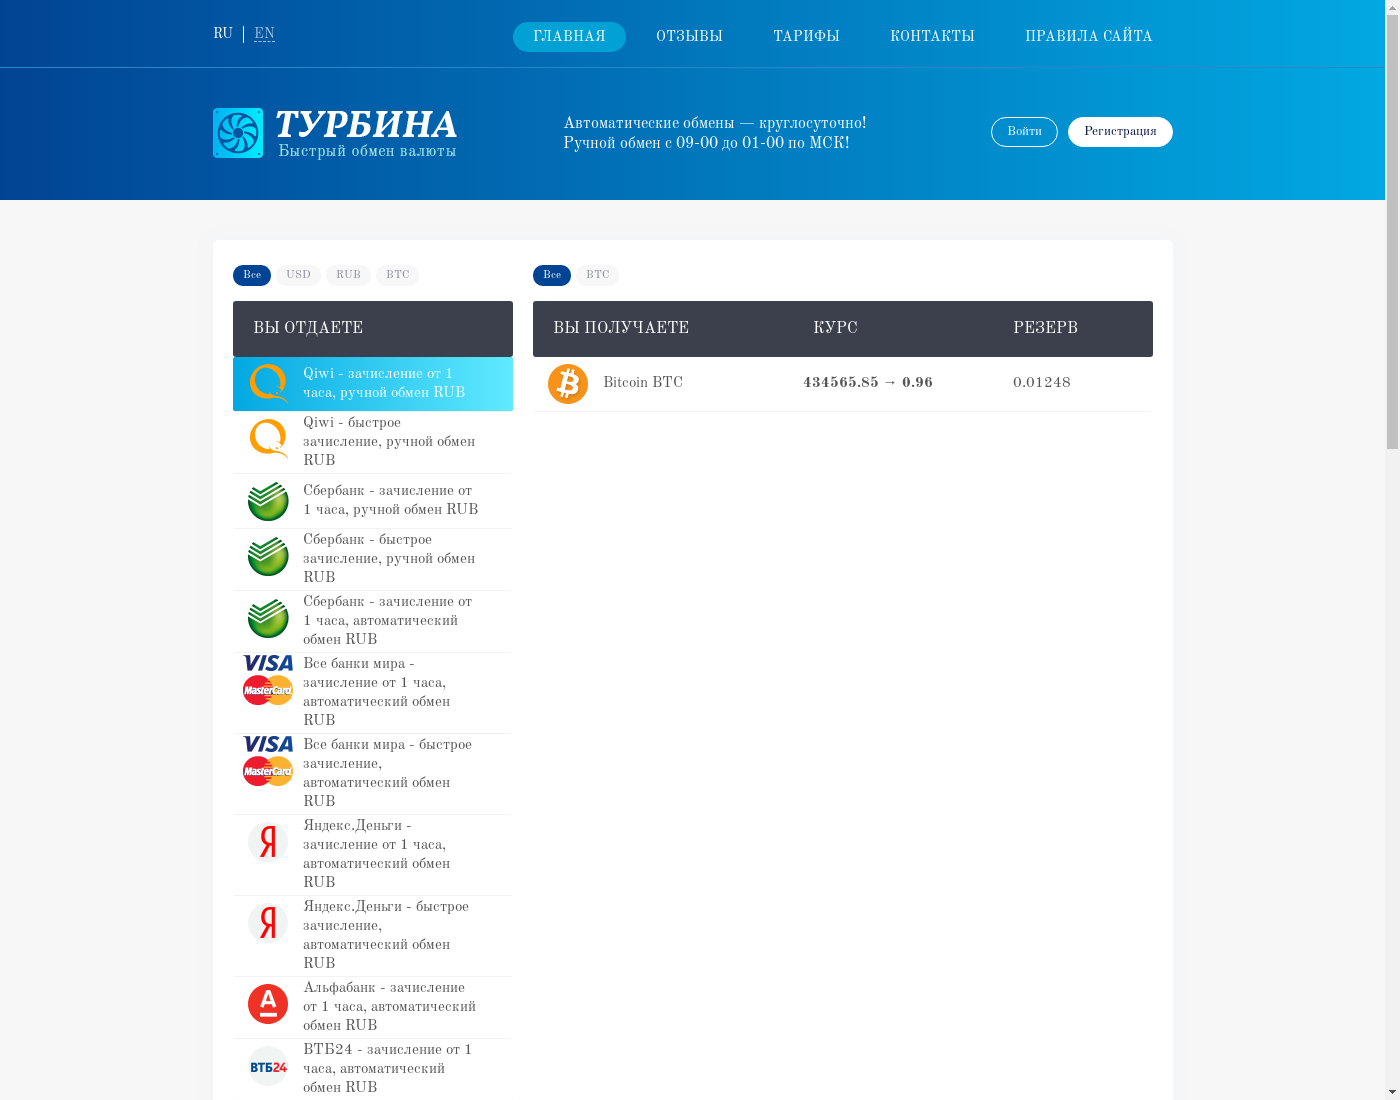 2rbina user interface: the home page in English